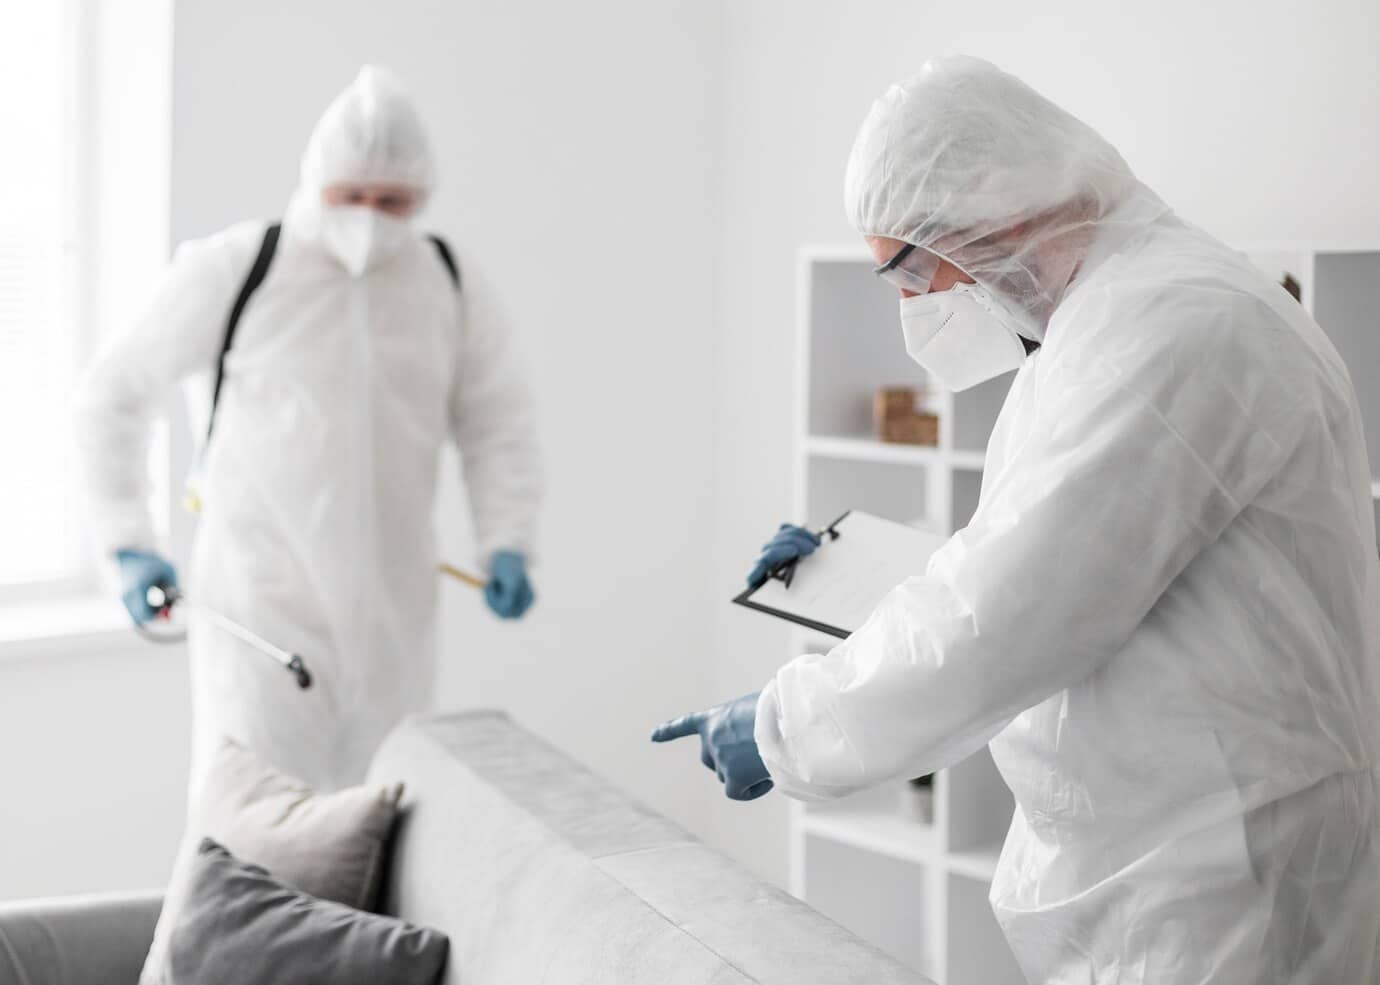 A room containing two people wearing protective gear.